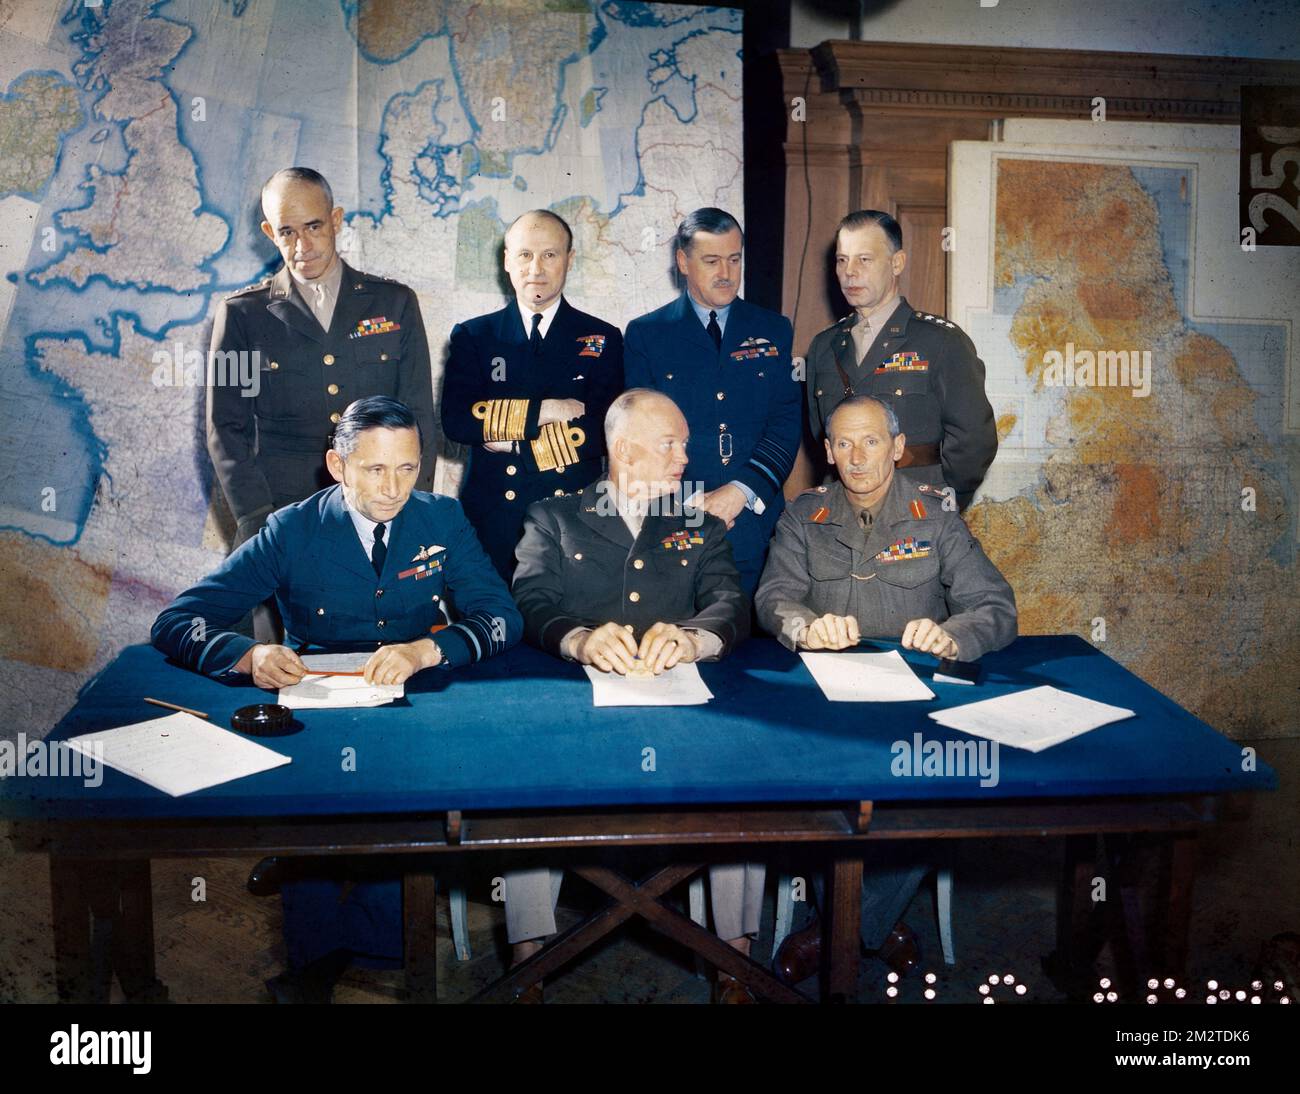 LONDON, ENGLAND, UK - 01 February 1944 - US Army General Dwight D. Eisenhower is shown with his staff.  Left to right, seated: RAF Air Chief Marshall Stock Photo